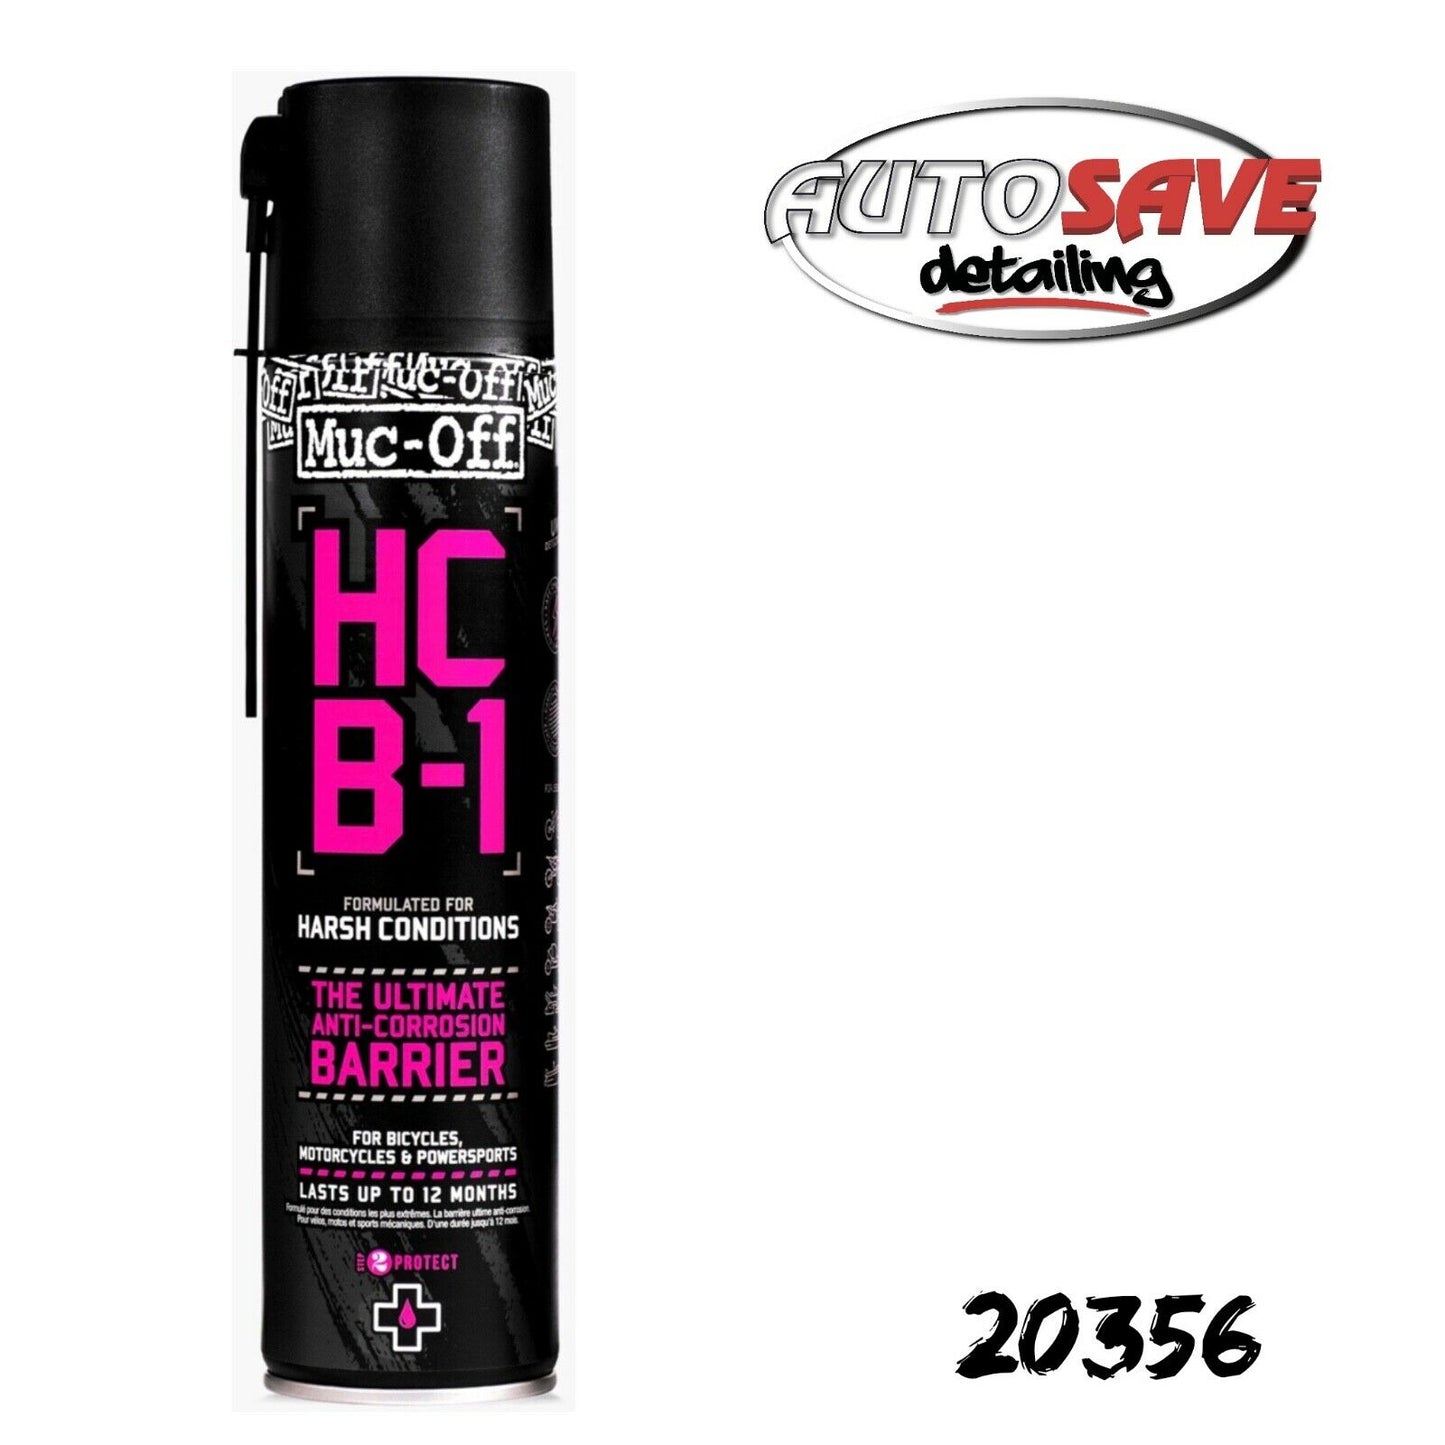 MUC-OFF HARSH CONDITION BARRIER 400ML HCB1 MO-20356